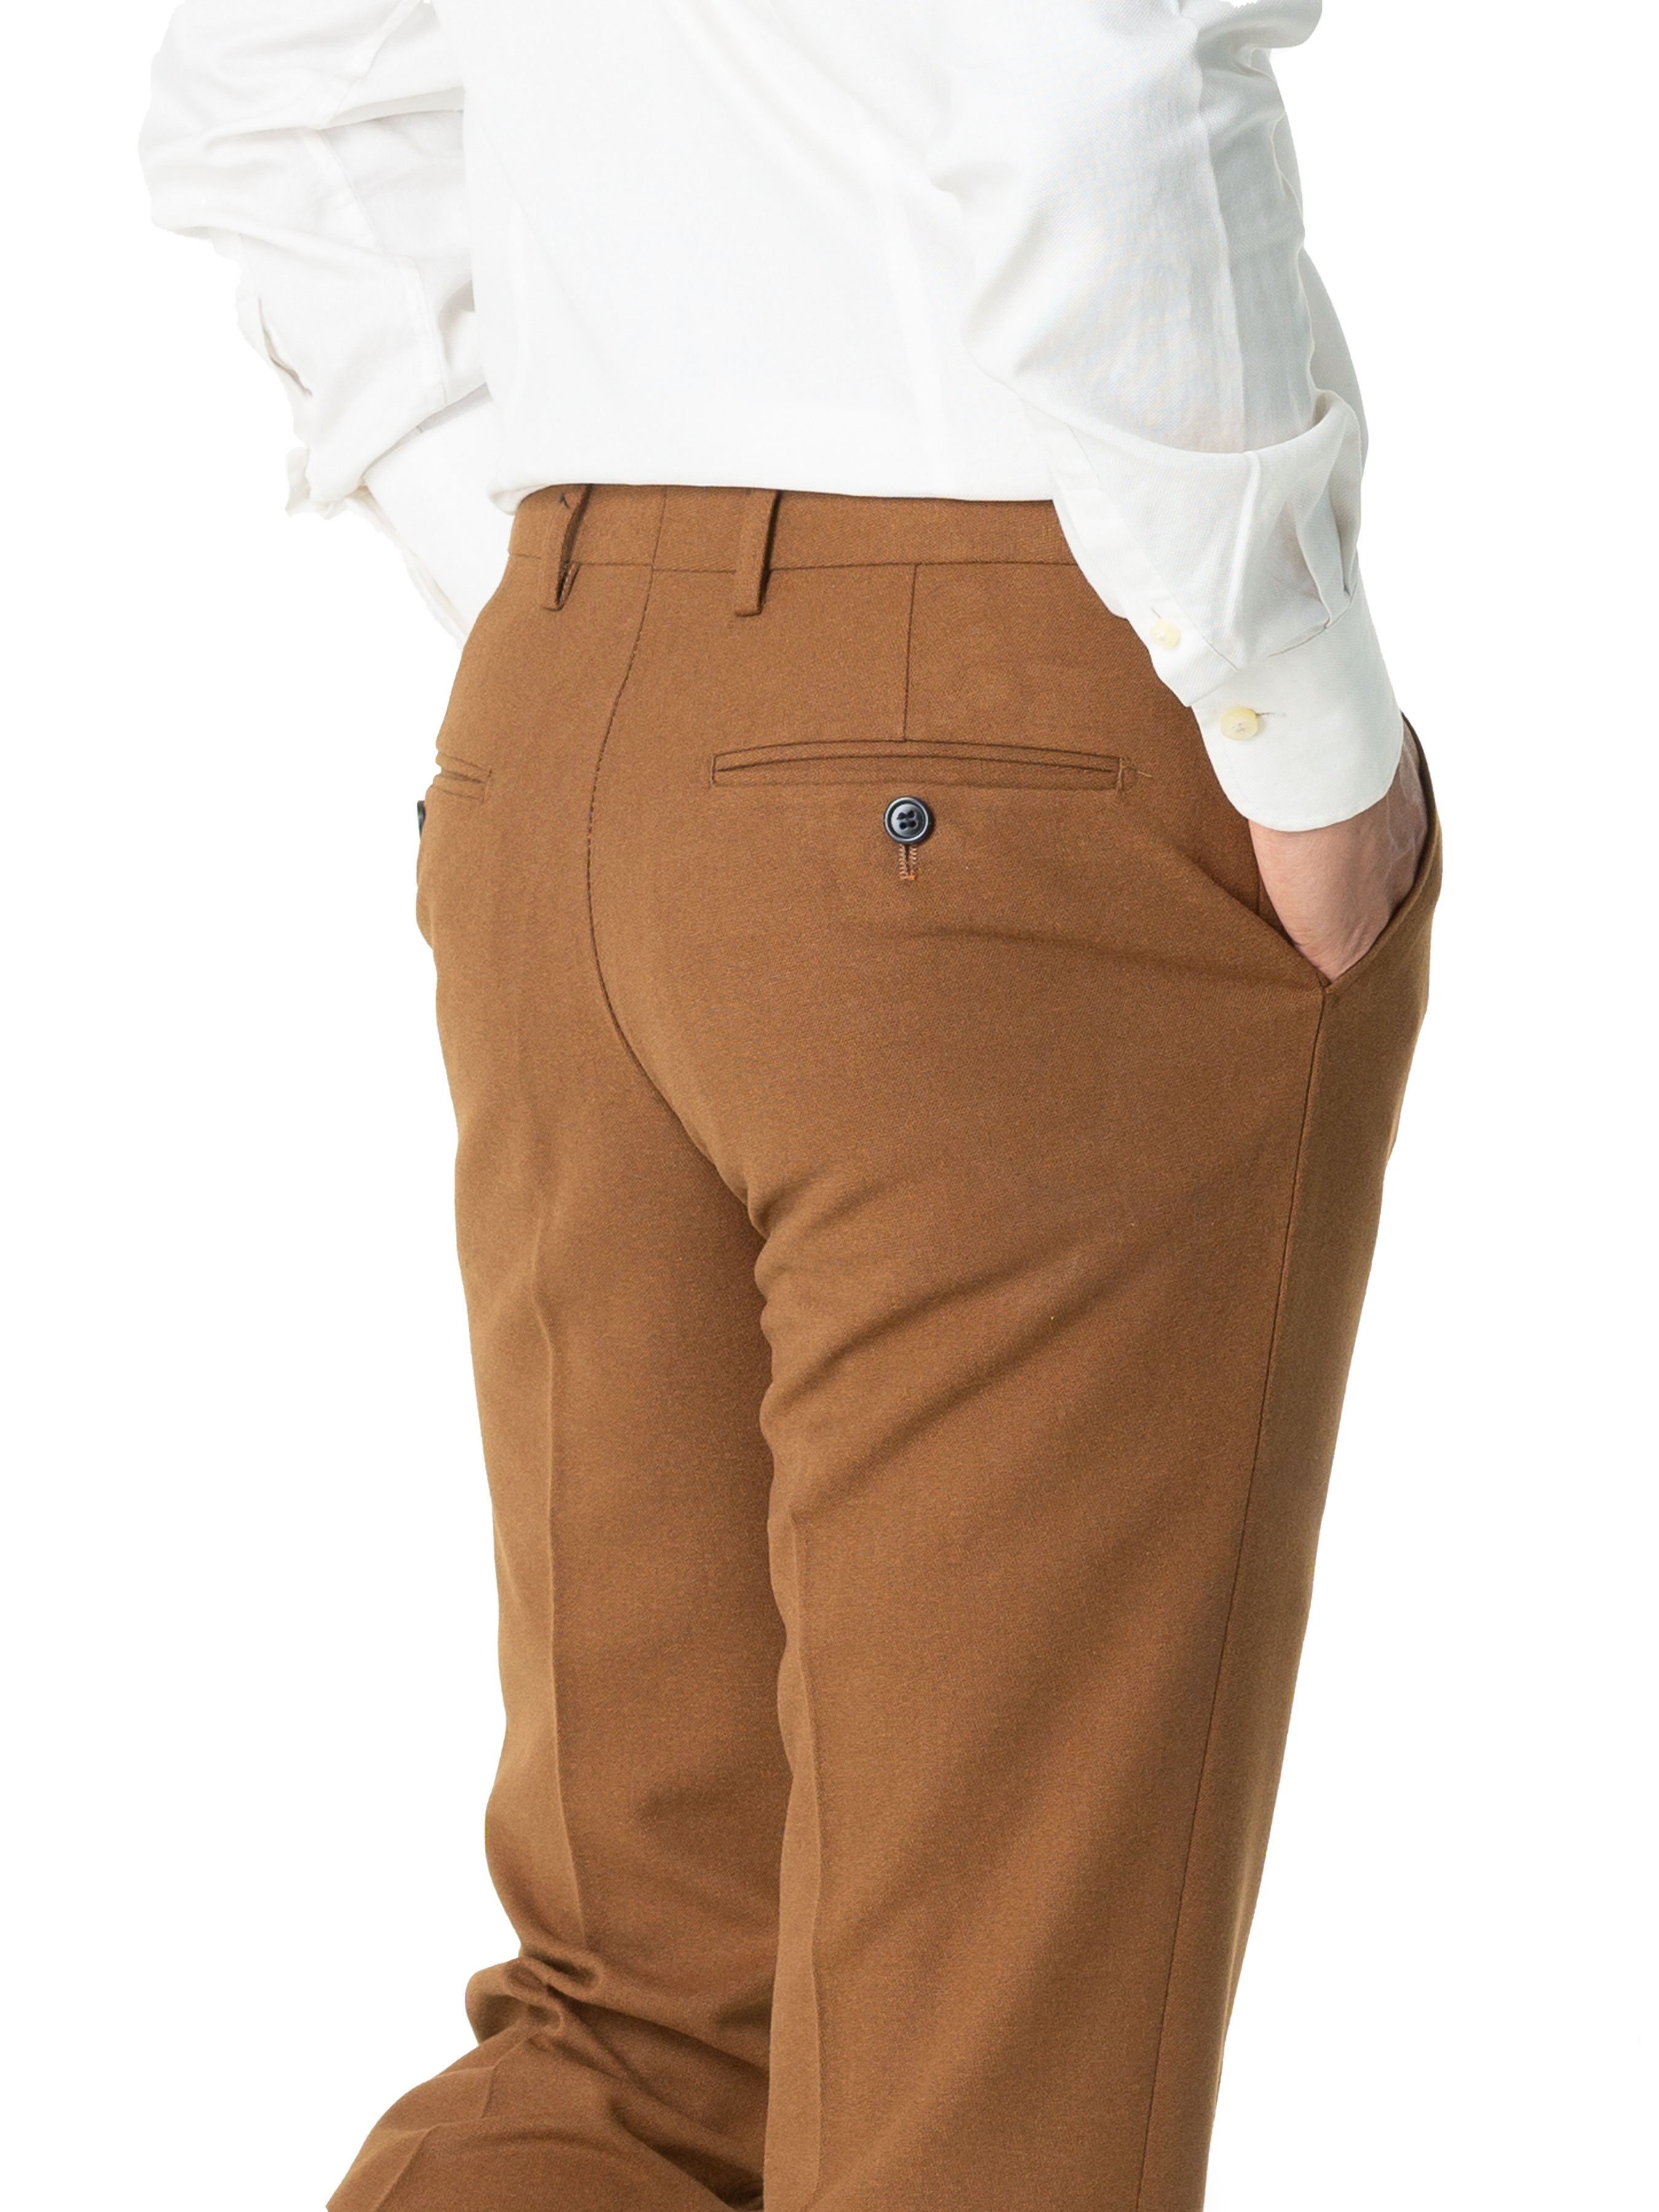 Trousers With Belt Loop - Cinnamon Textured Plain (Stretchable) - Zeve Shoes